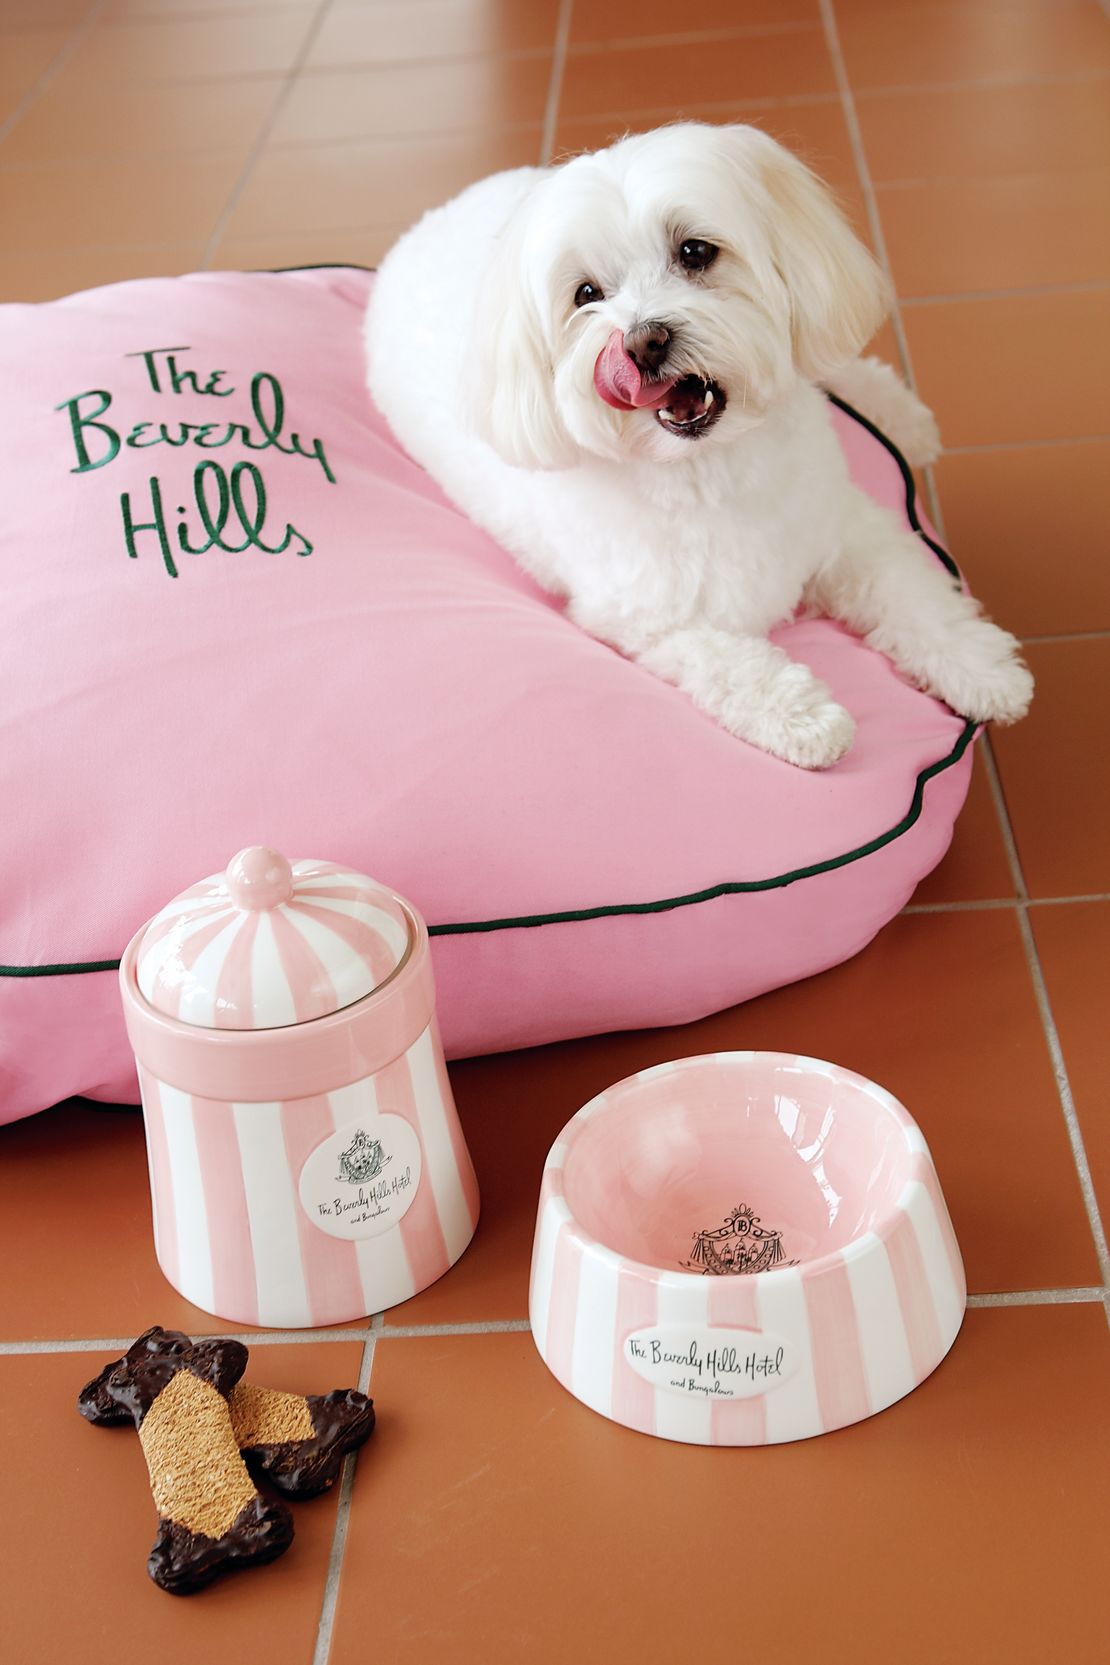 A The Beverly Hills Hotel, even pooches are treated to personalized pillows.